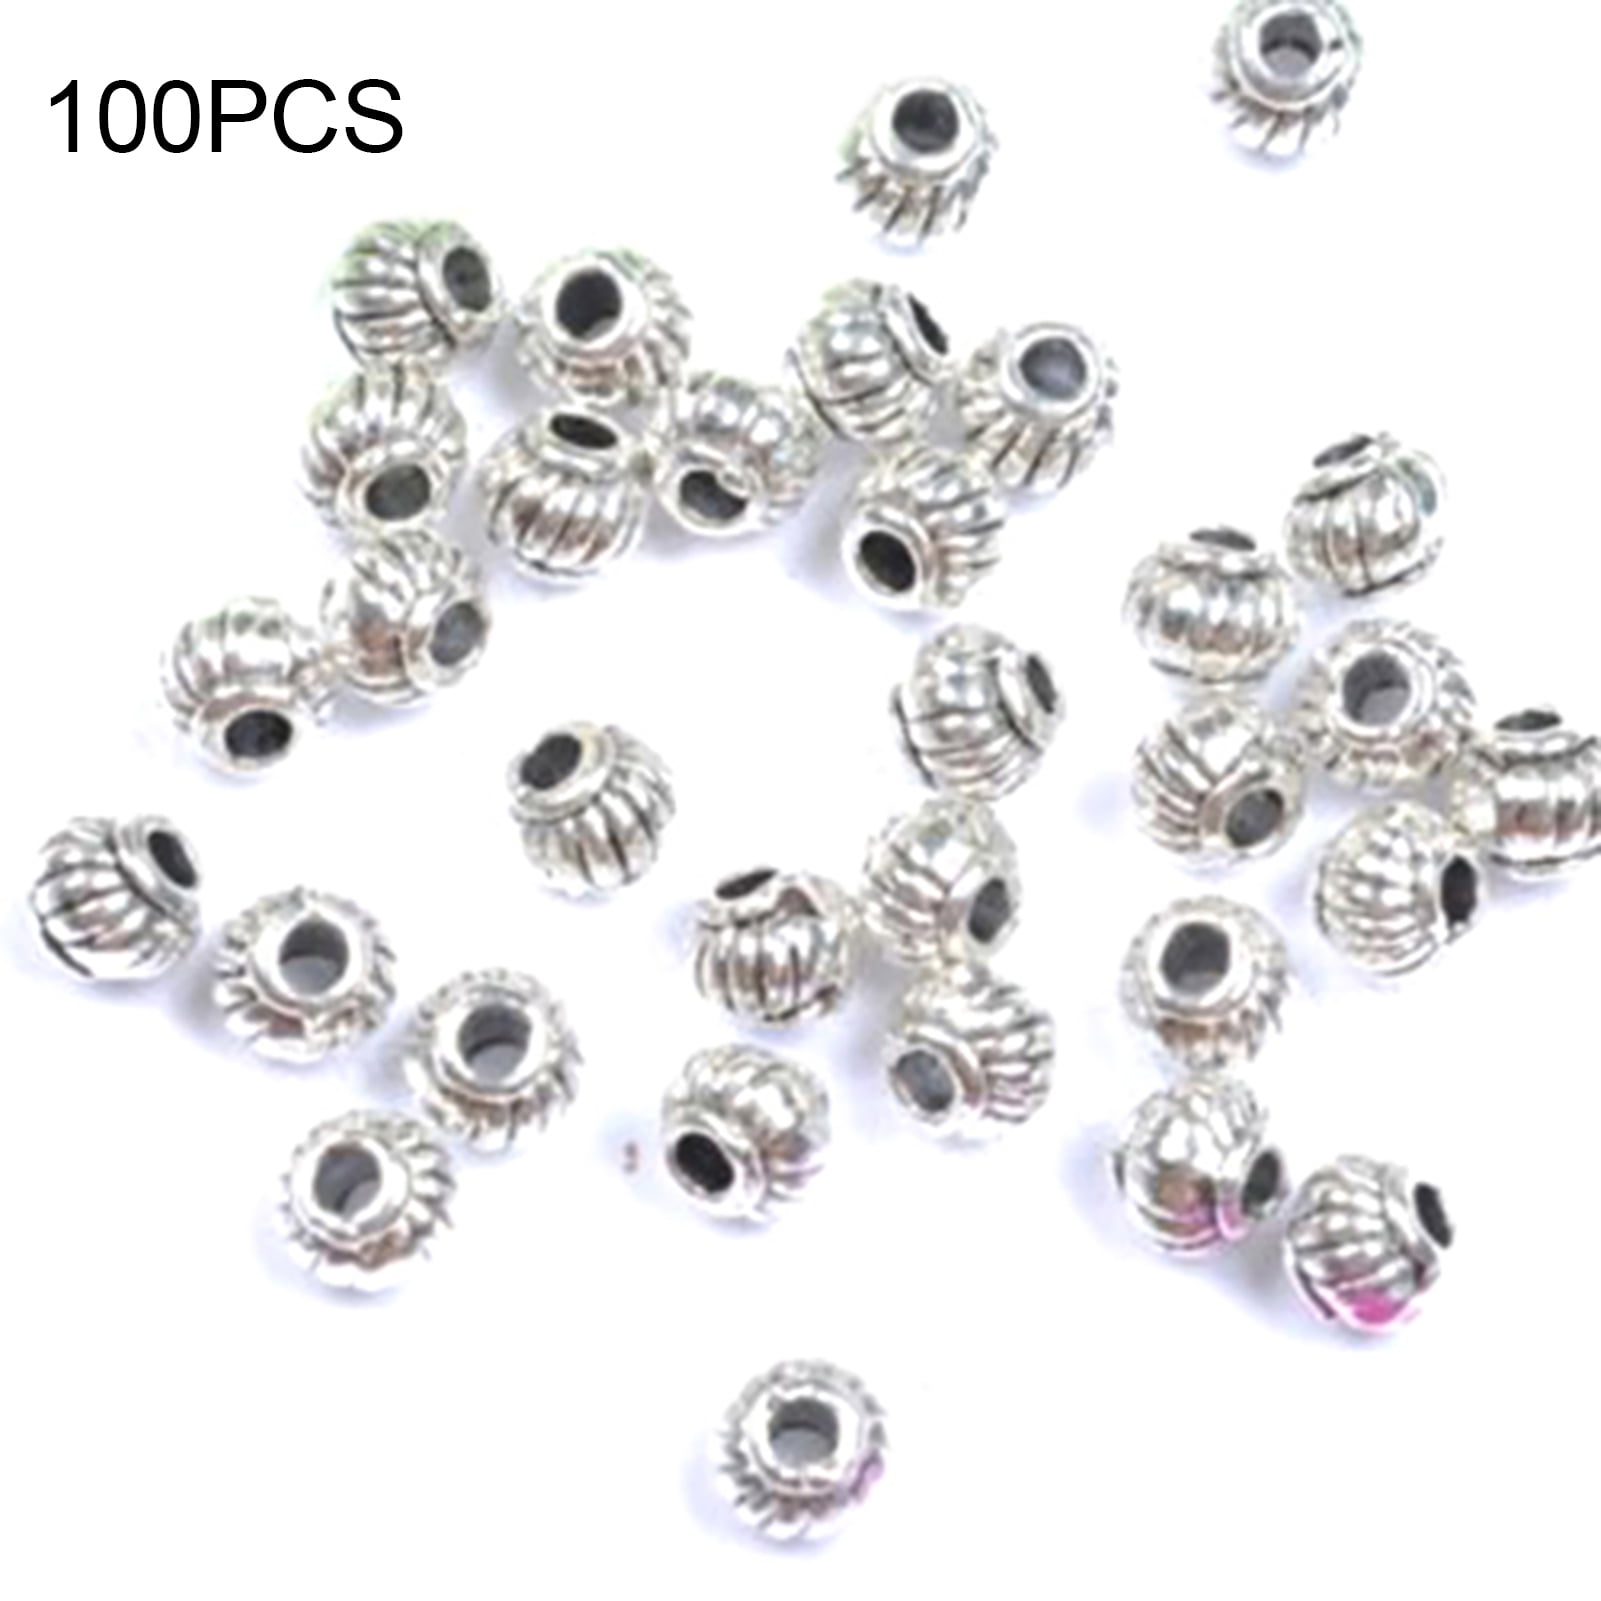 40 New Tiny Flower Charms Tibetan Silver Tone Spacer Beads 8mm 